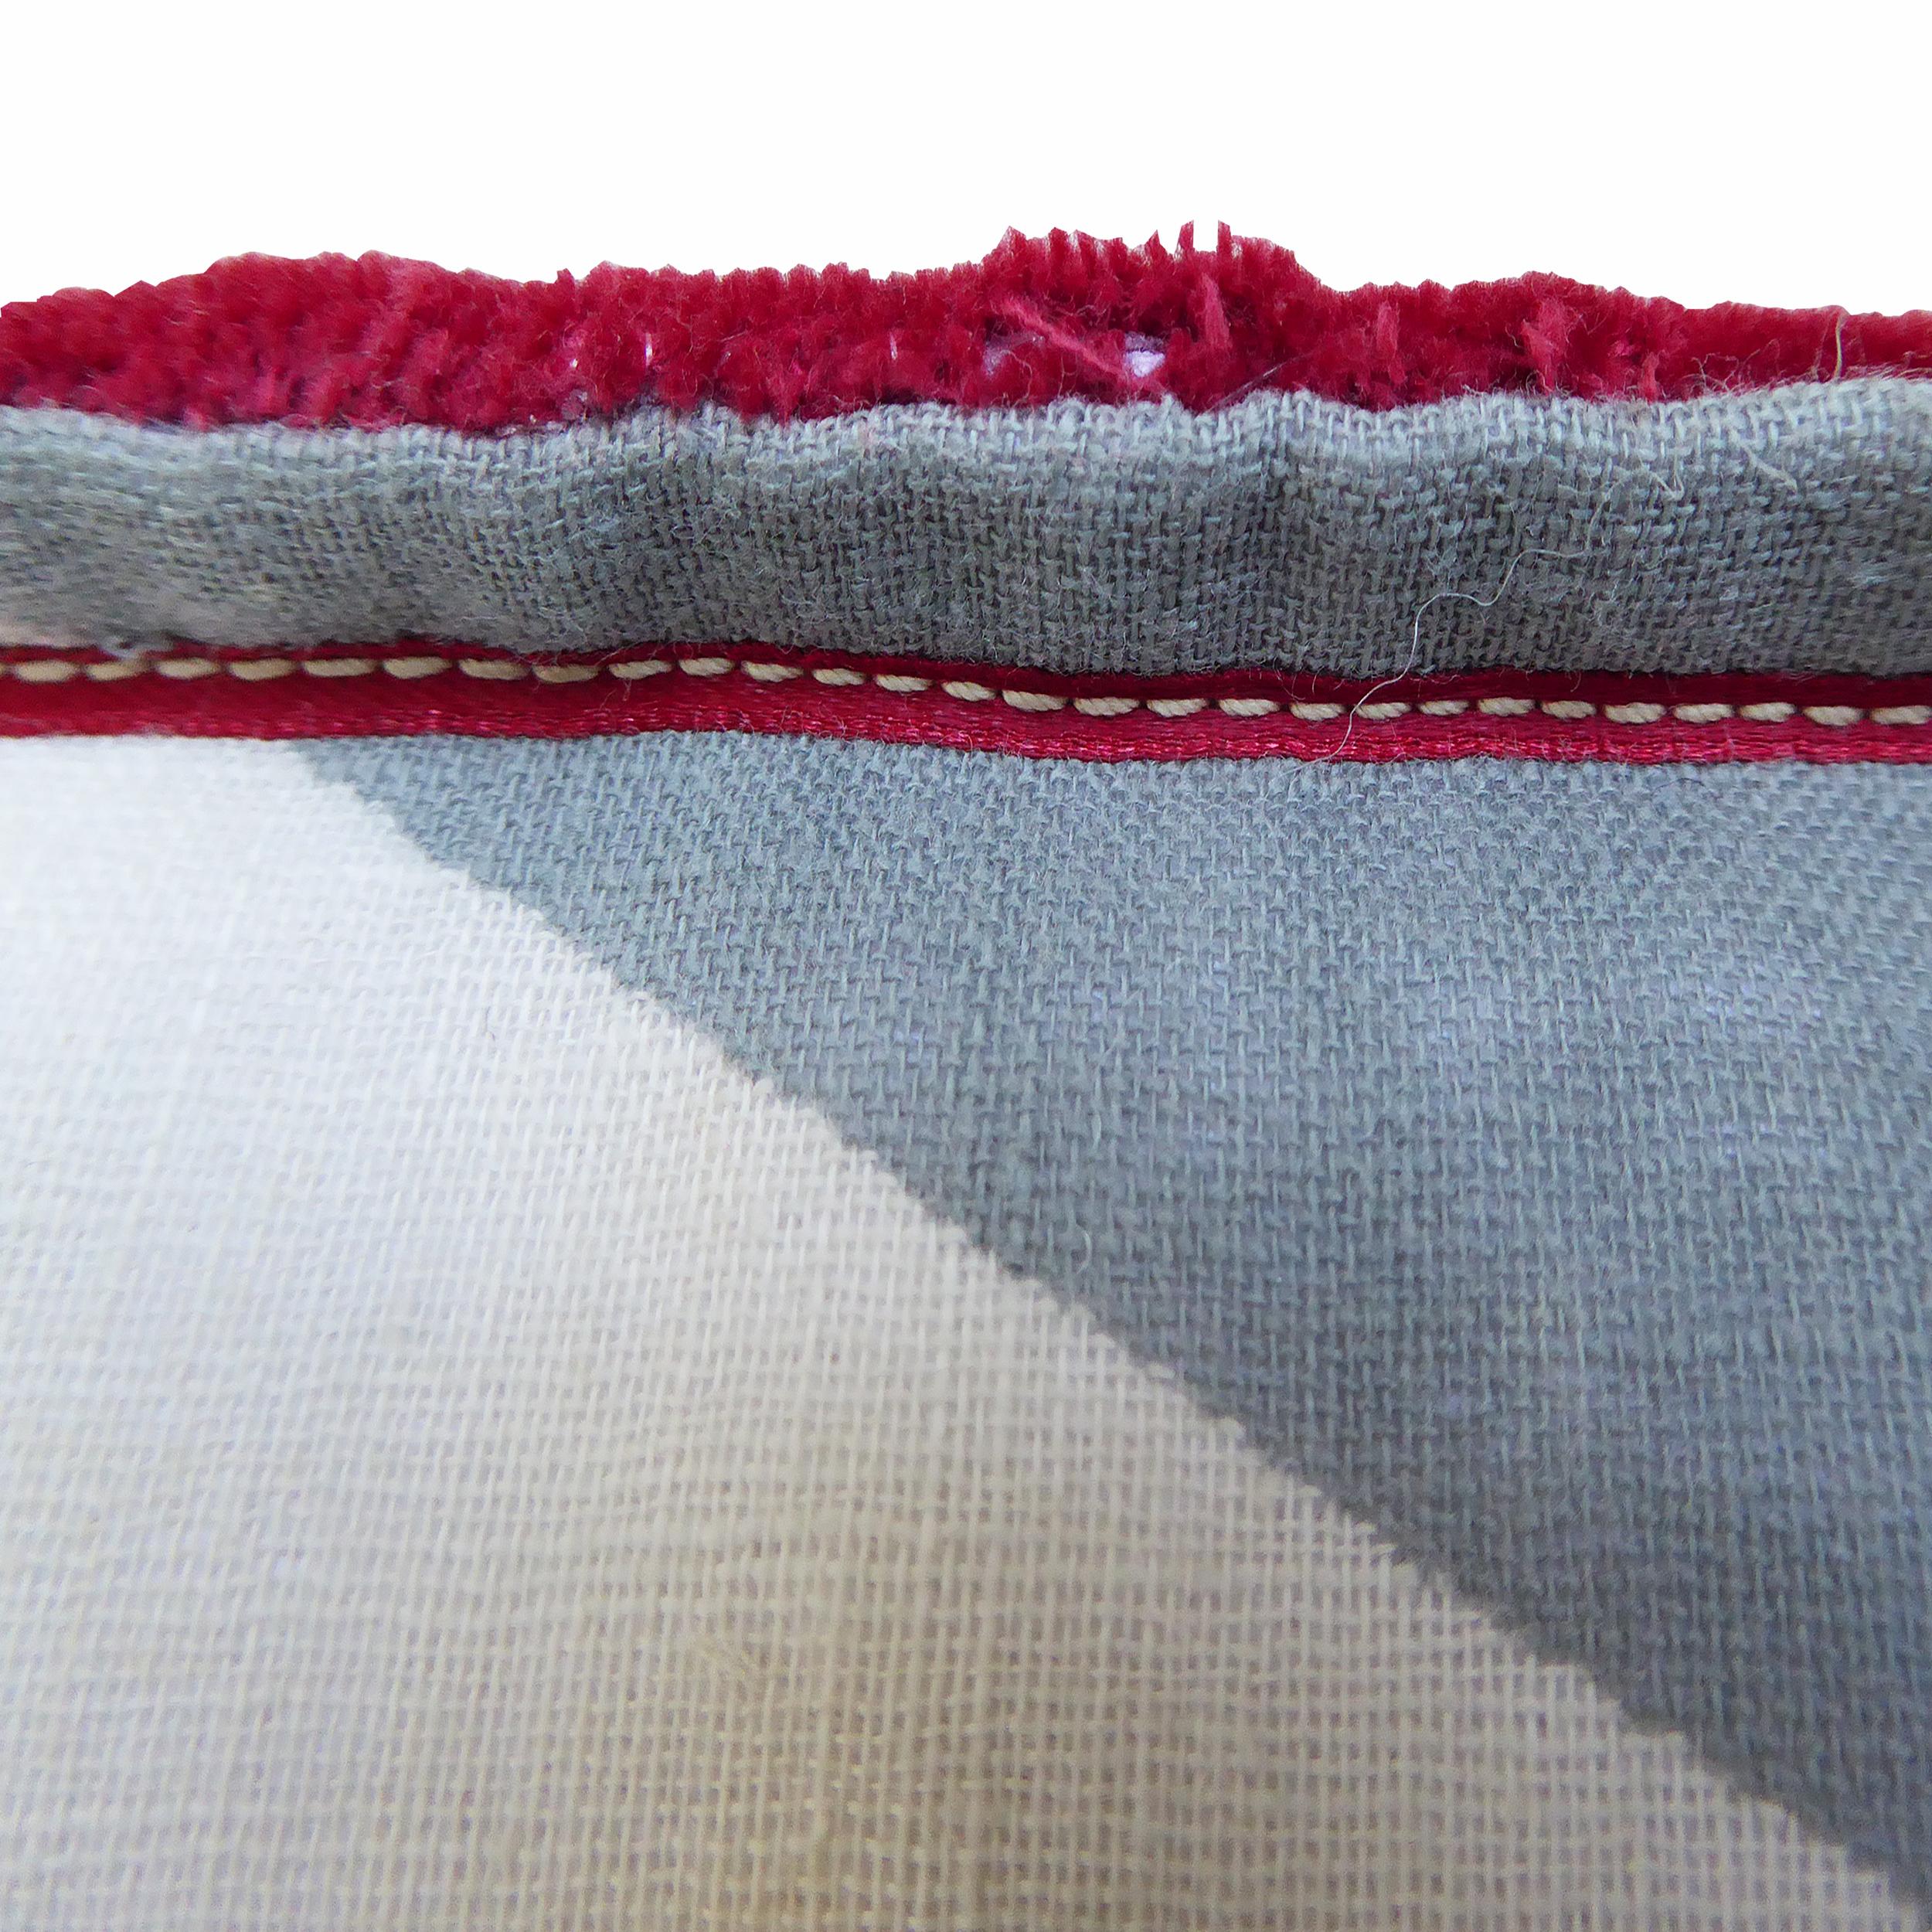 Hand-Crafted 'Vintage Cushions' Bespoke-Made Pillow 'Distressed Union Jack Flag, Made in UK